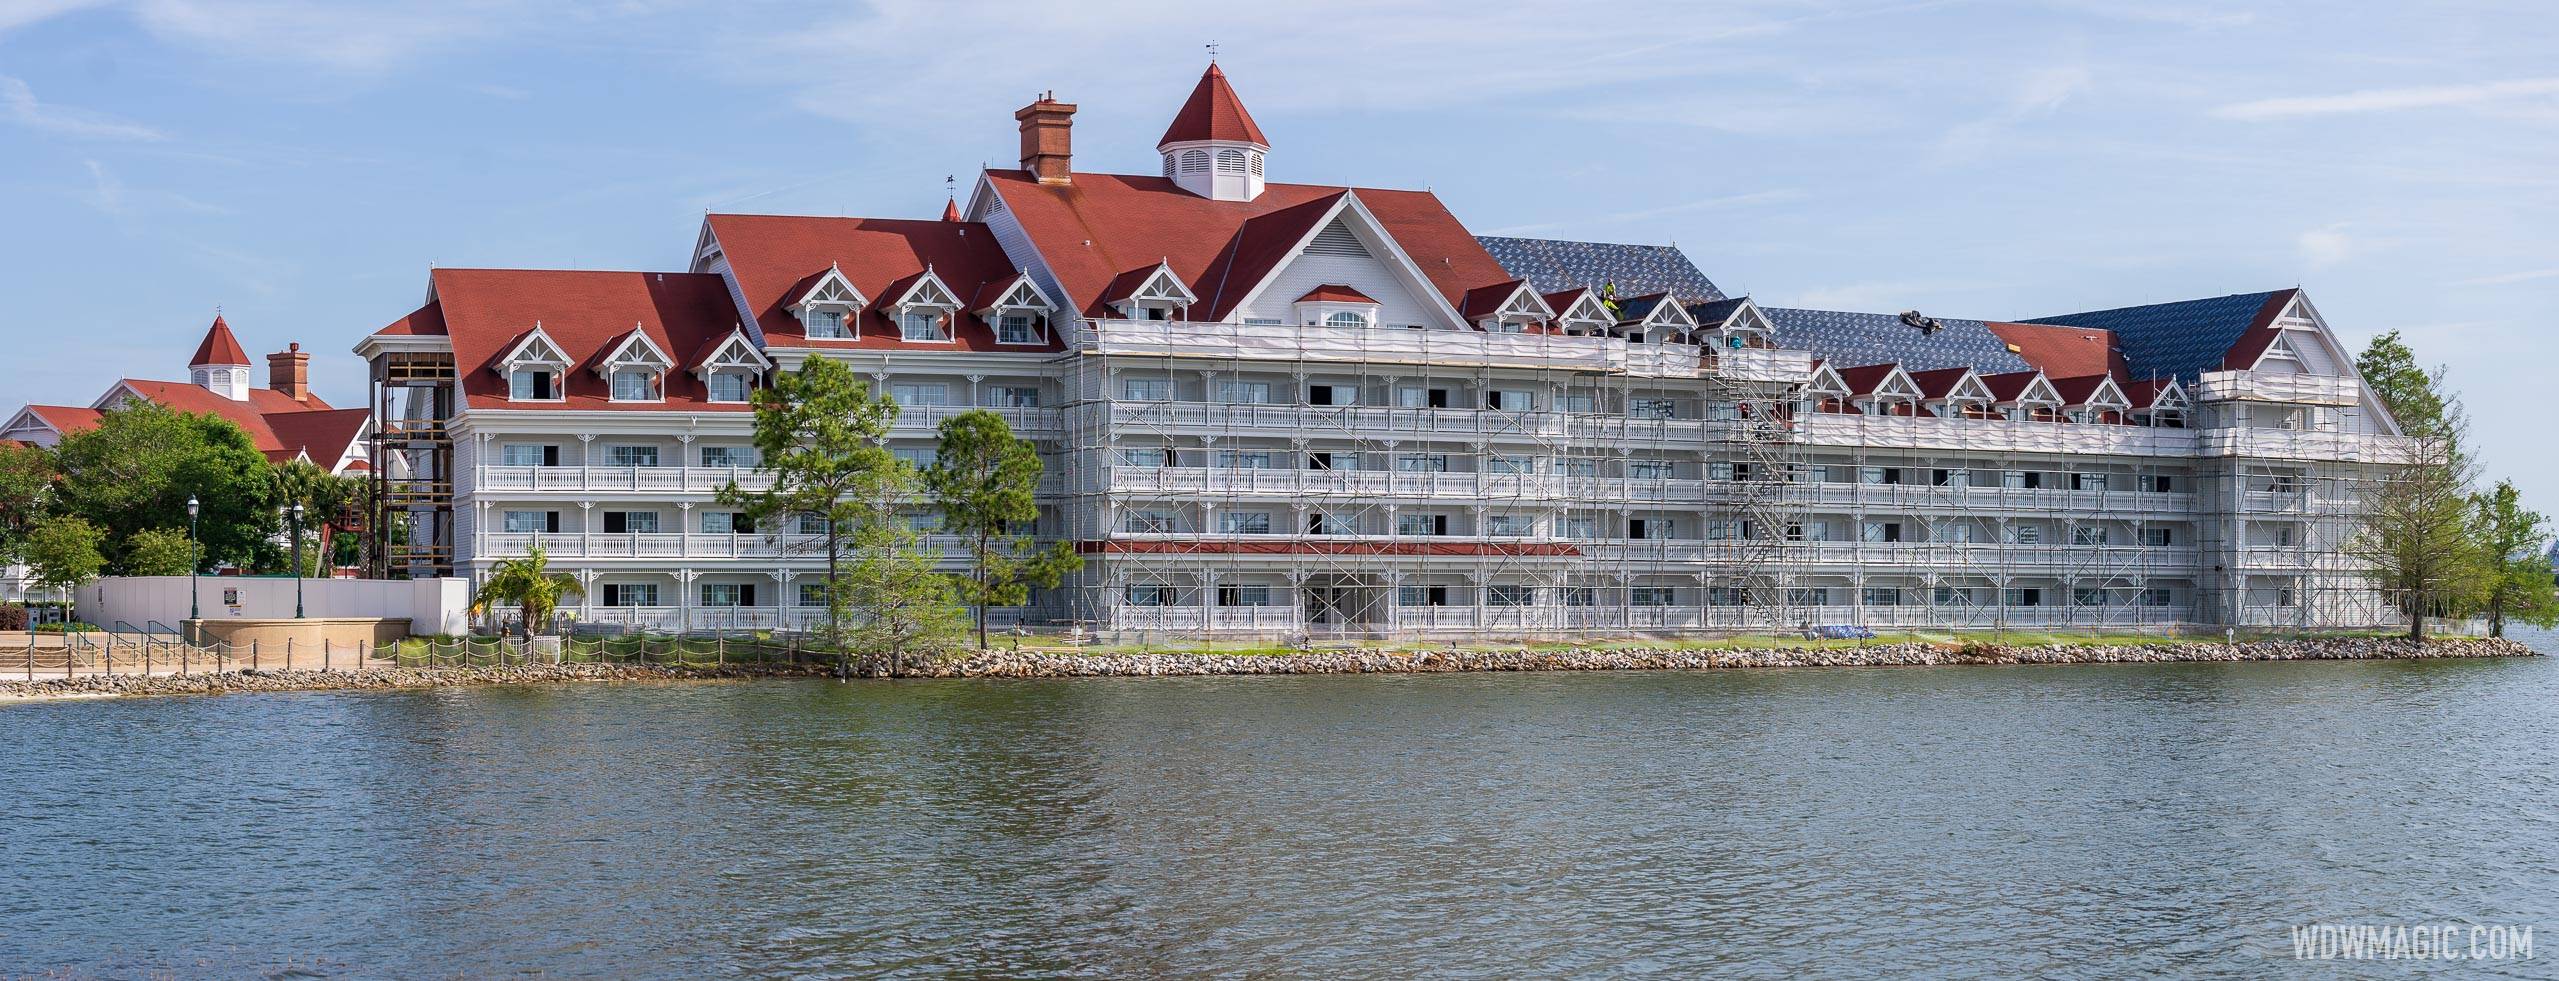 Construction update from Disney's Grand Floridian Resort as new DVC villas take shape at the Big Pine Key building